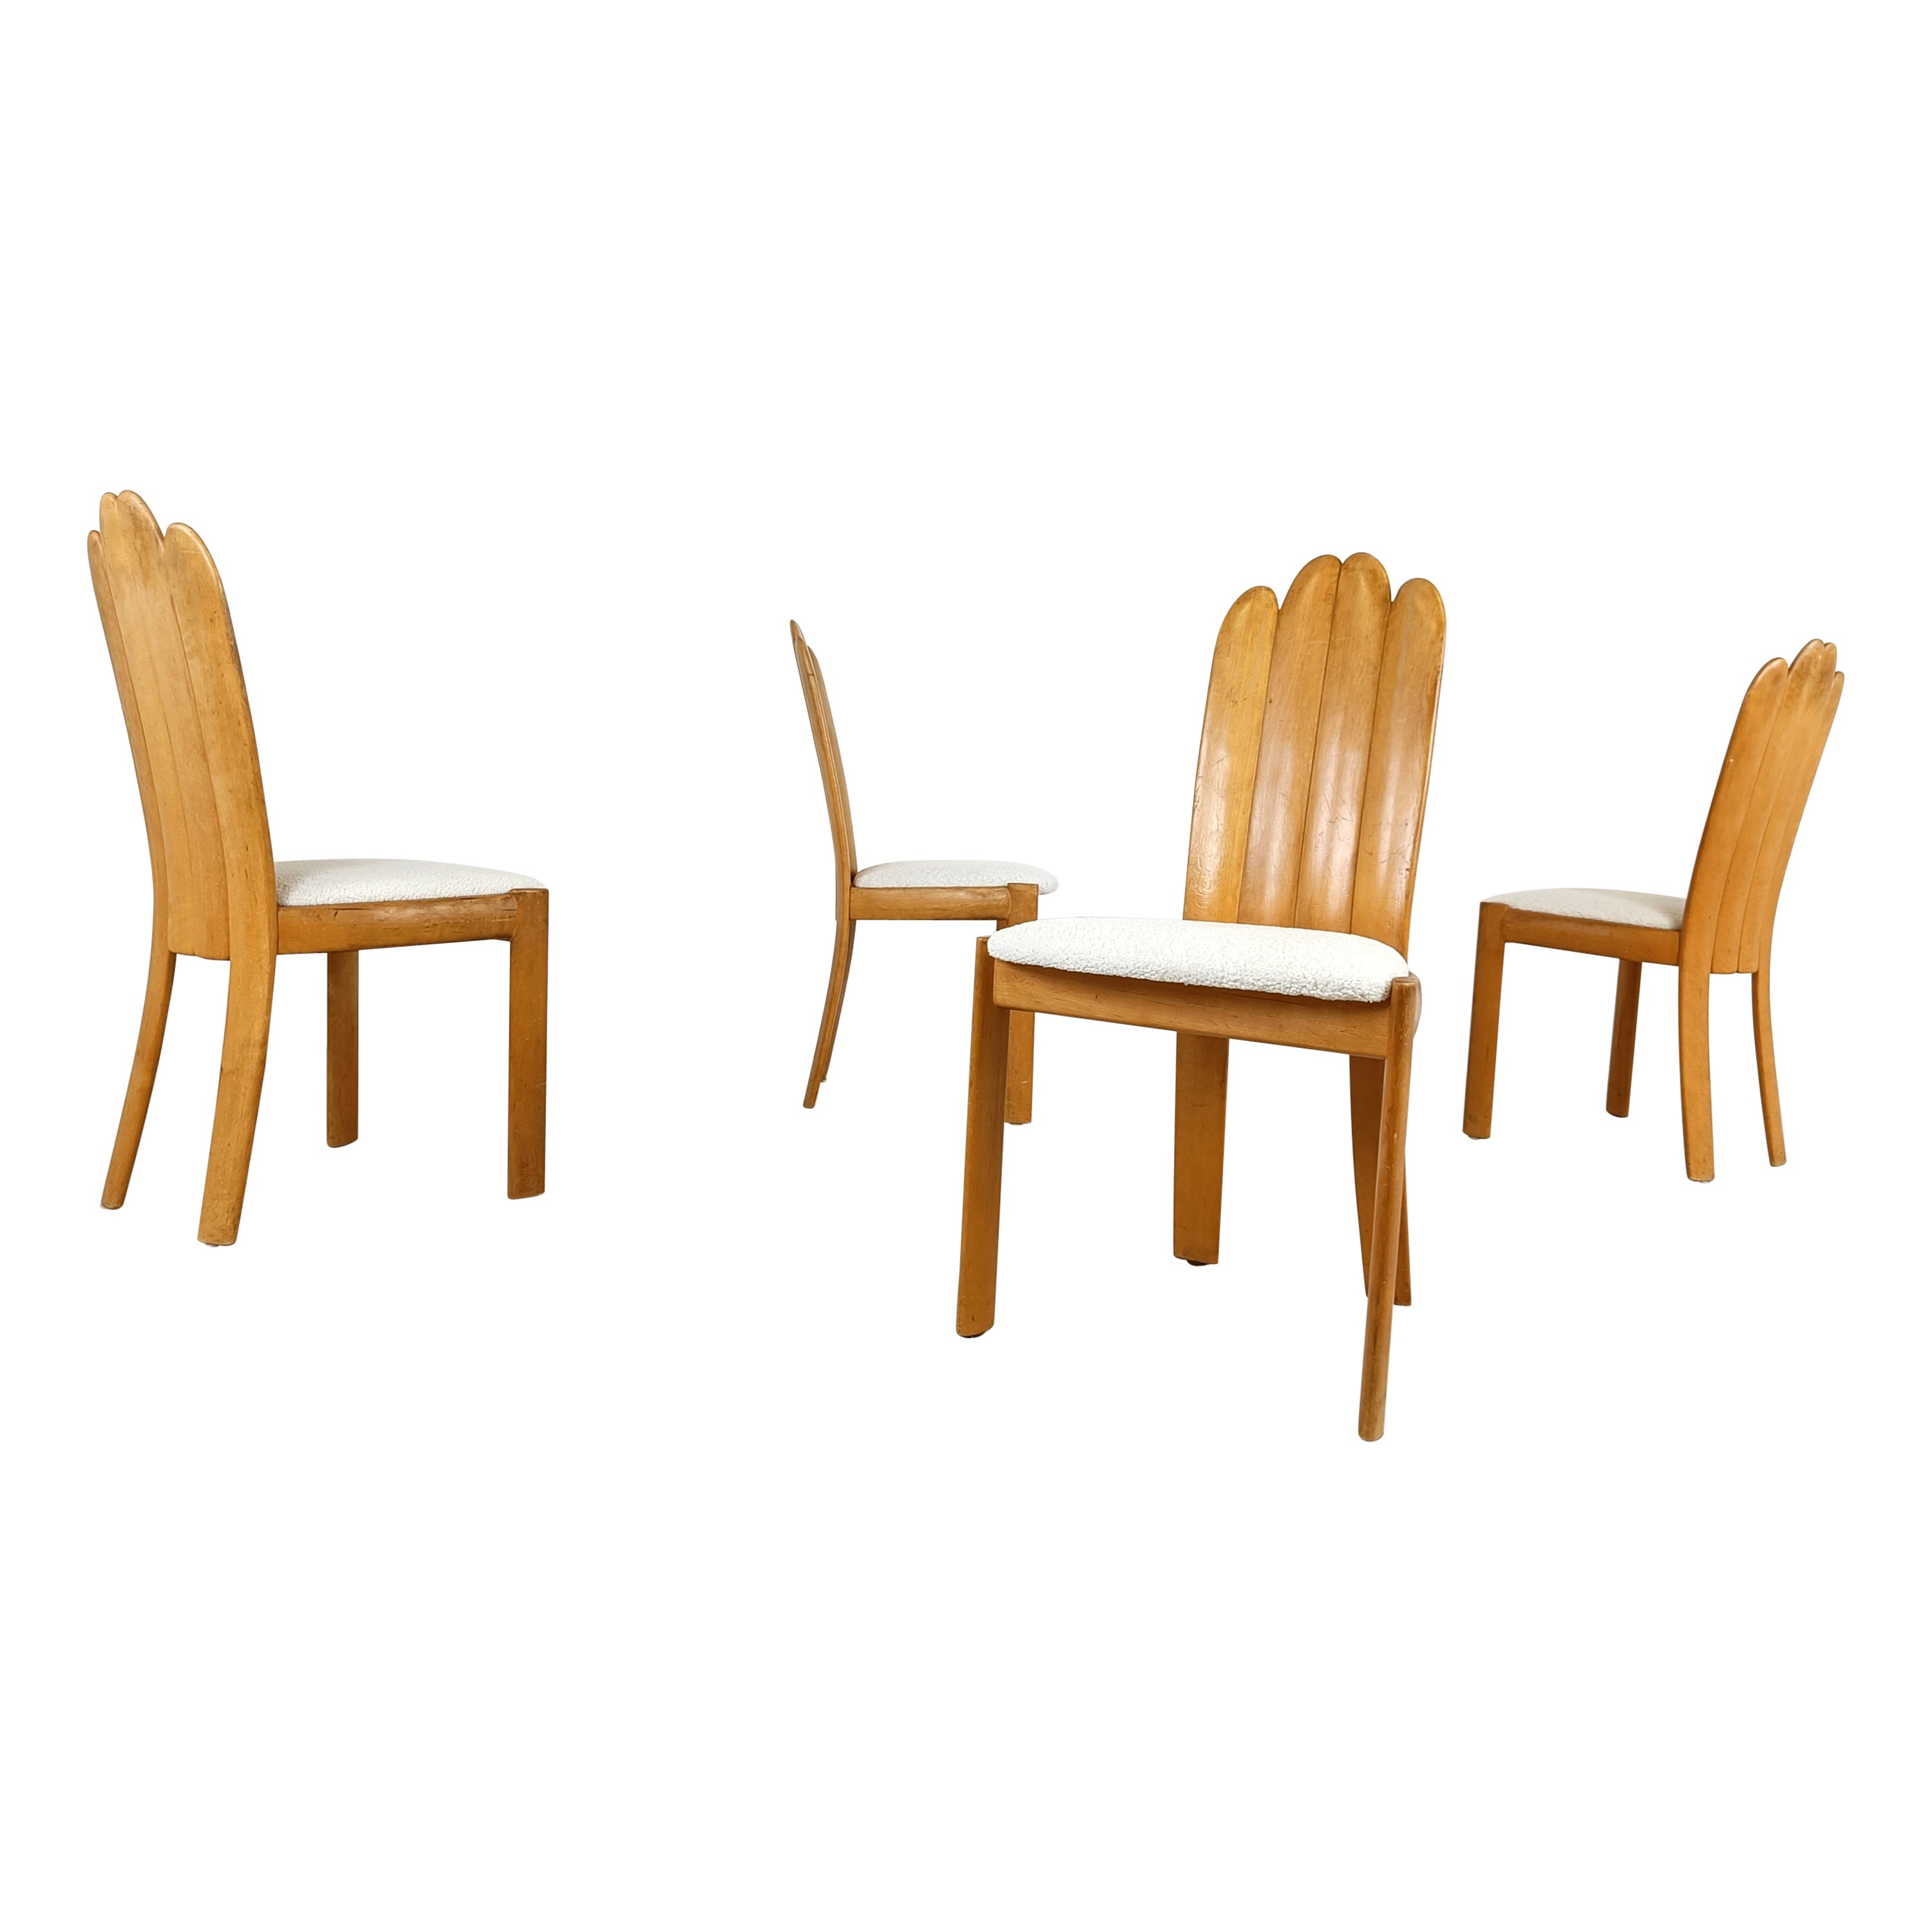 Set of 4 scandinavian dining chairs by Vamdrup Stolefabrik, 1960s For Sale